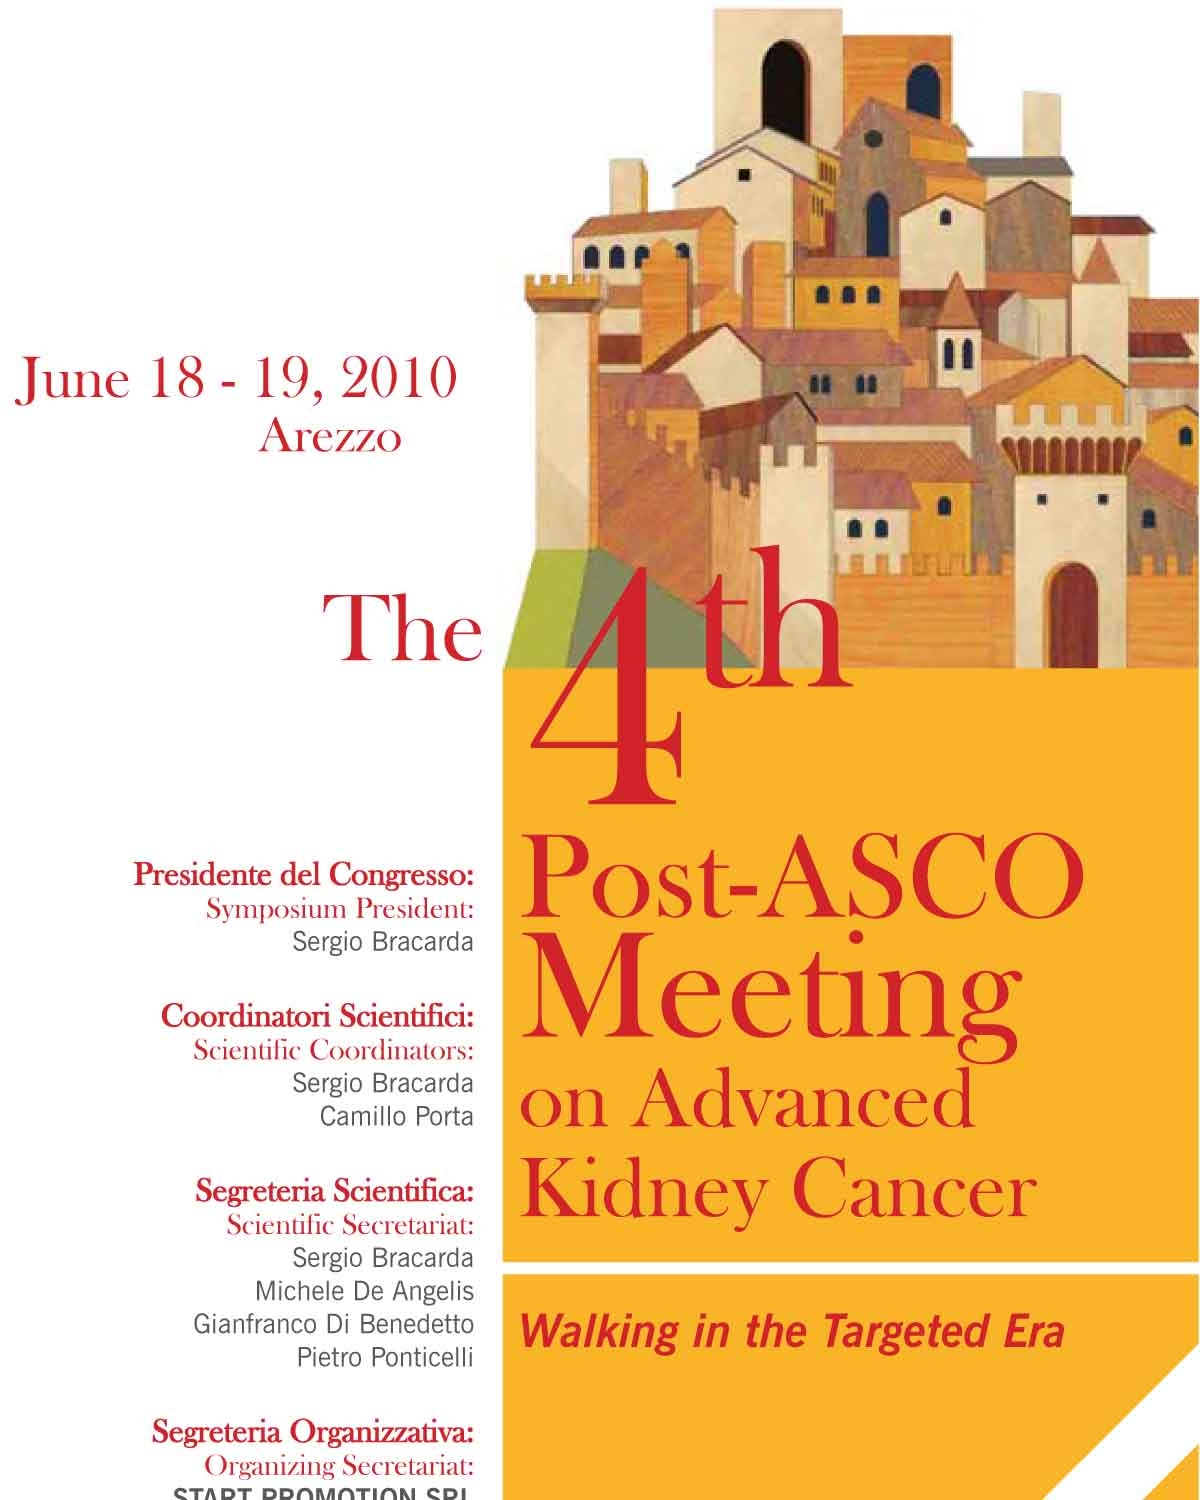 The 4th Post Asco Meeting on Advanced Kidney Cancer 2010